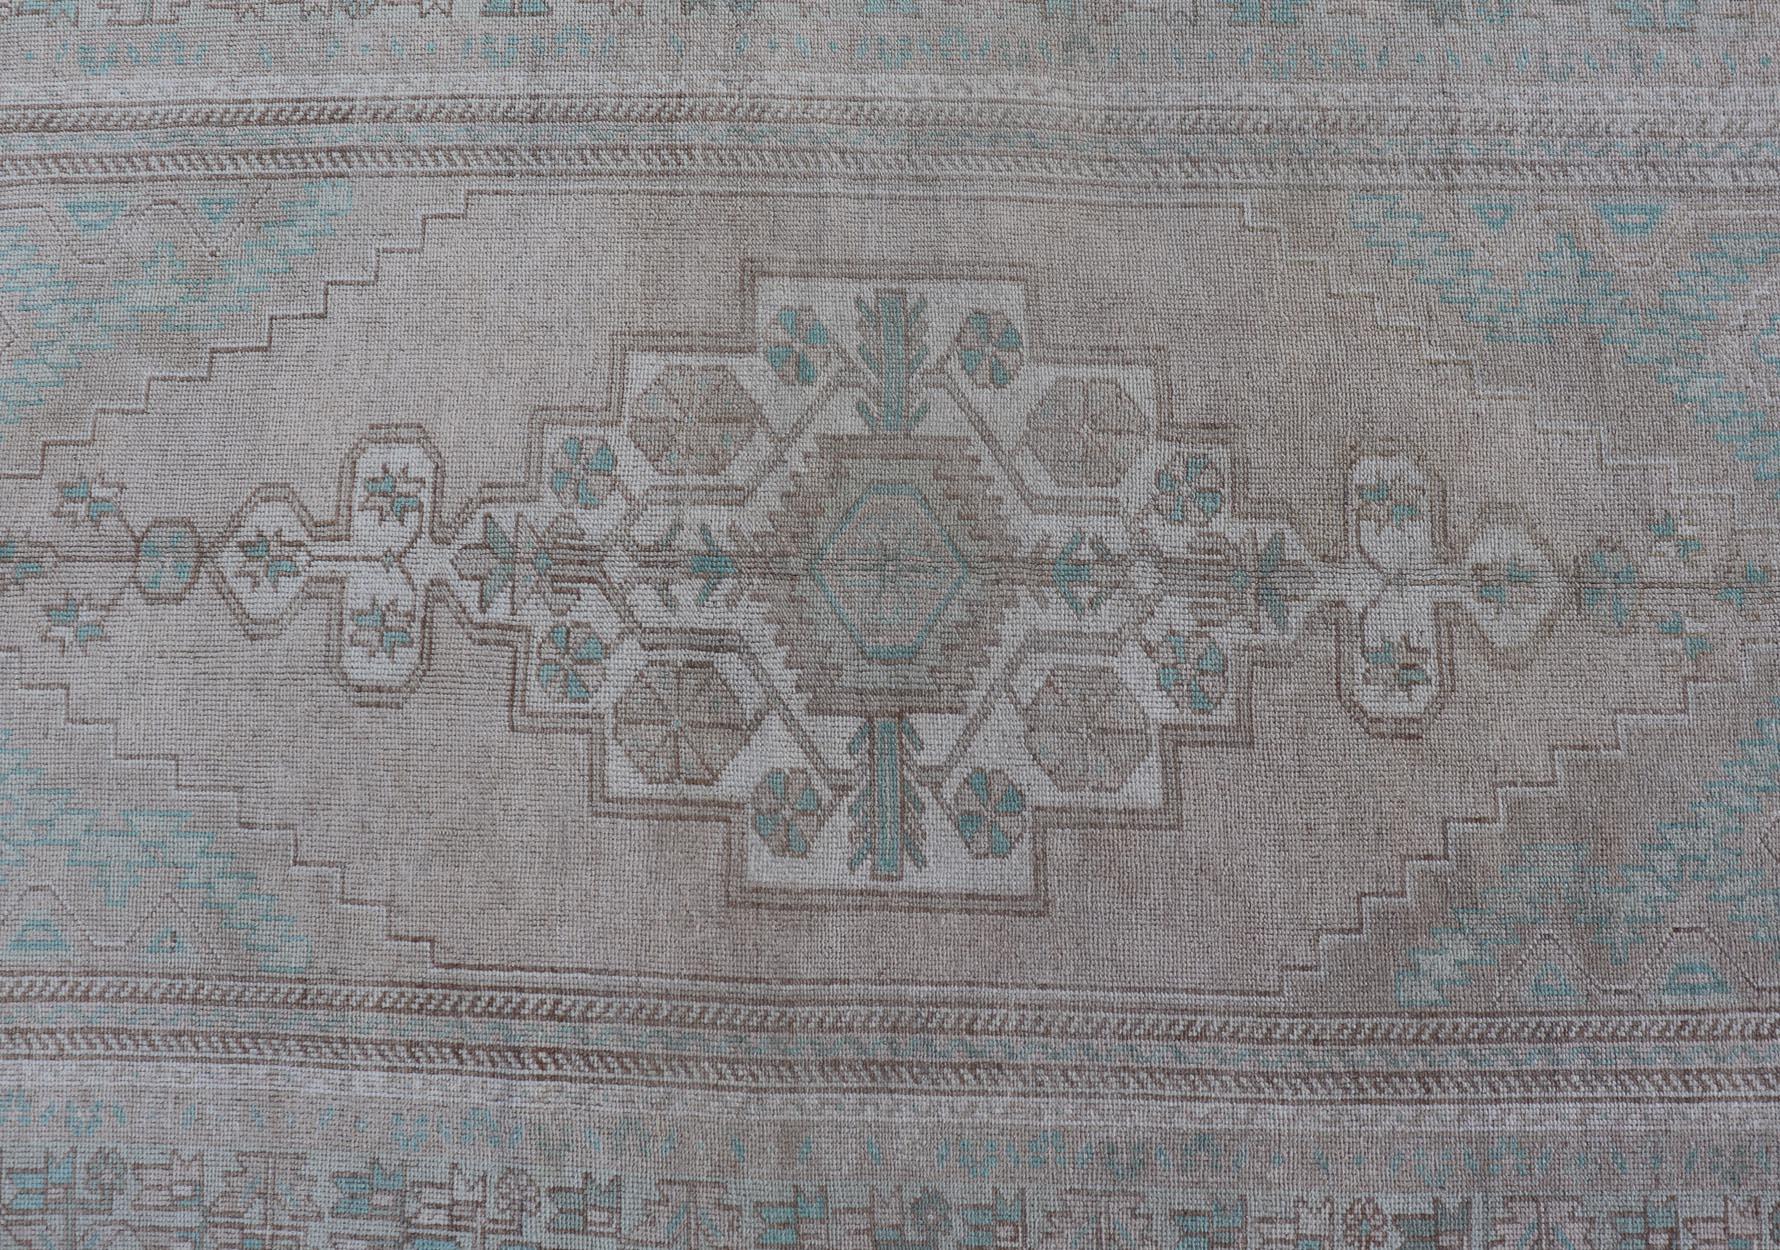 Vintage Turkish Medallion Oushak Area Rug in Tan, Taupe, Pink, and Green For Sale 3